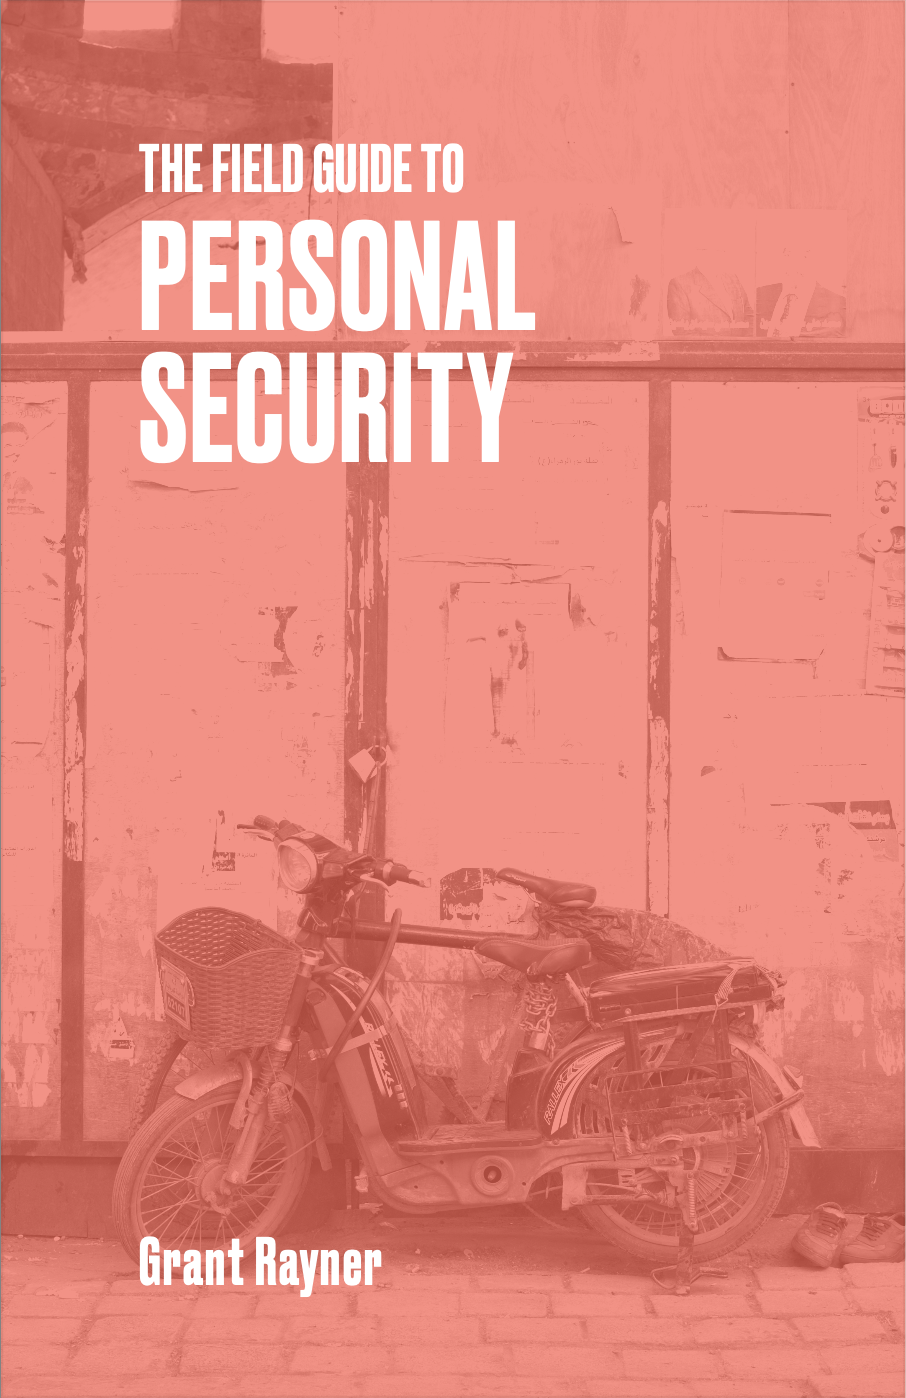 The Field Guide to Personal Security